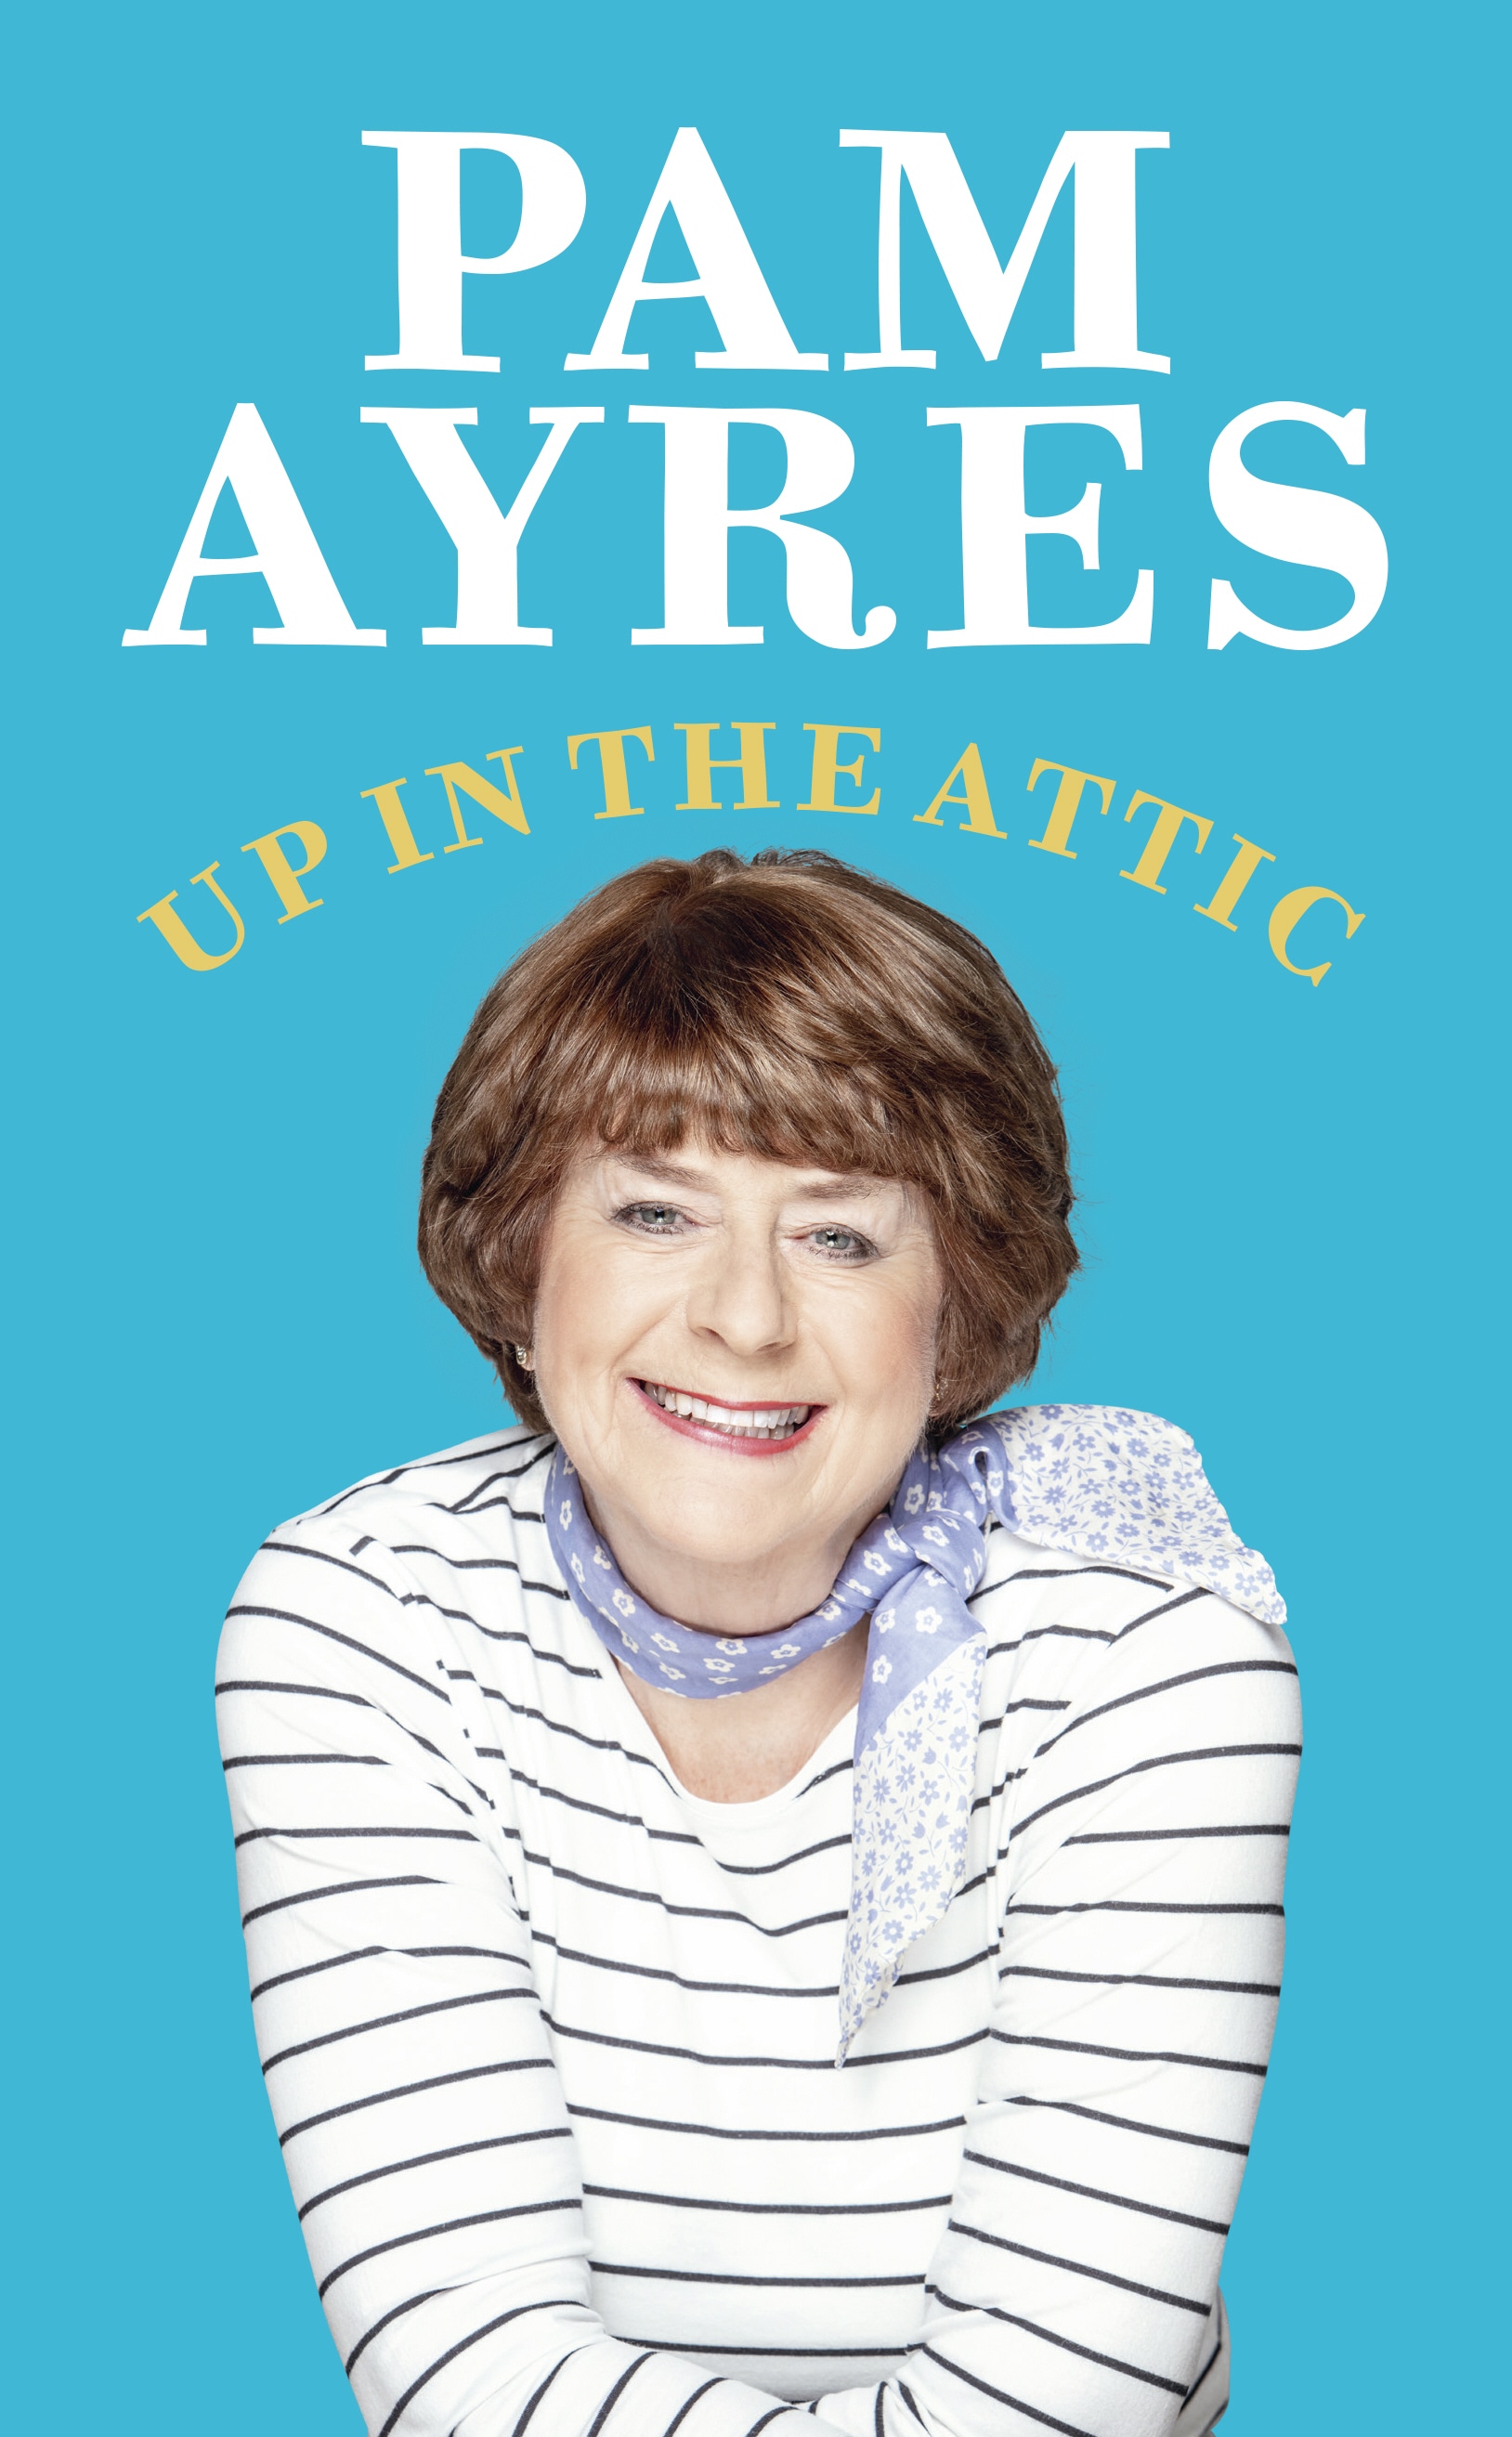 Book “Up in the Attic” by Pam Ayres — September 26, 2019